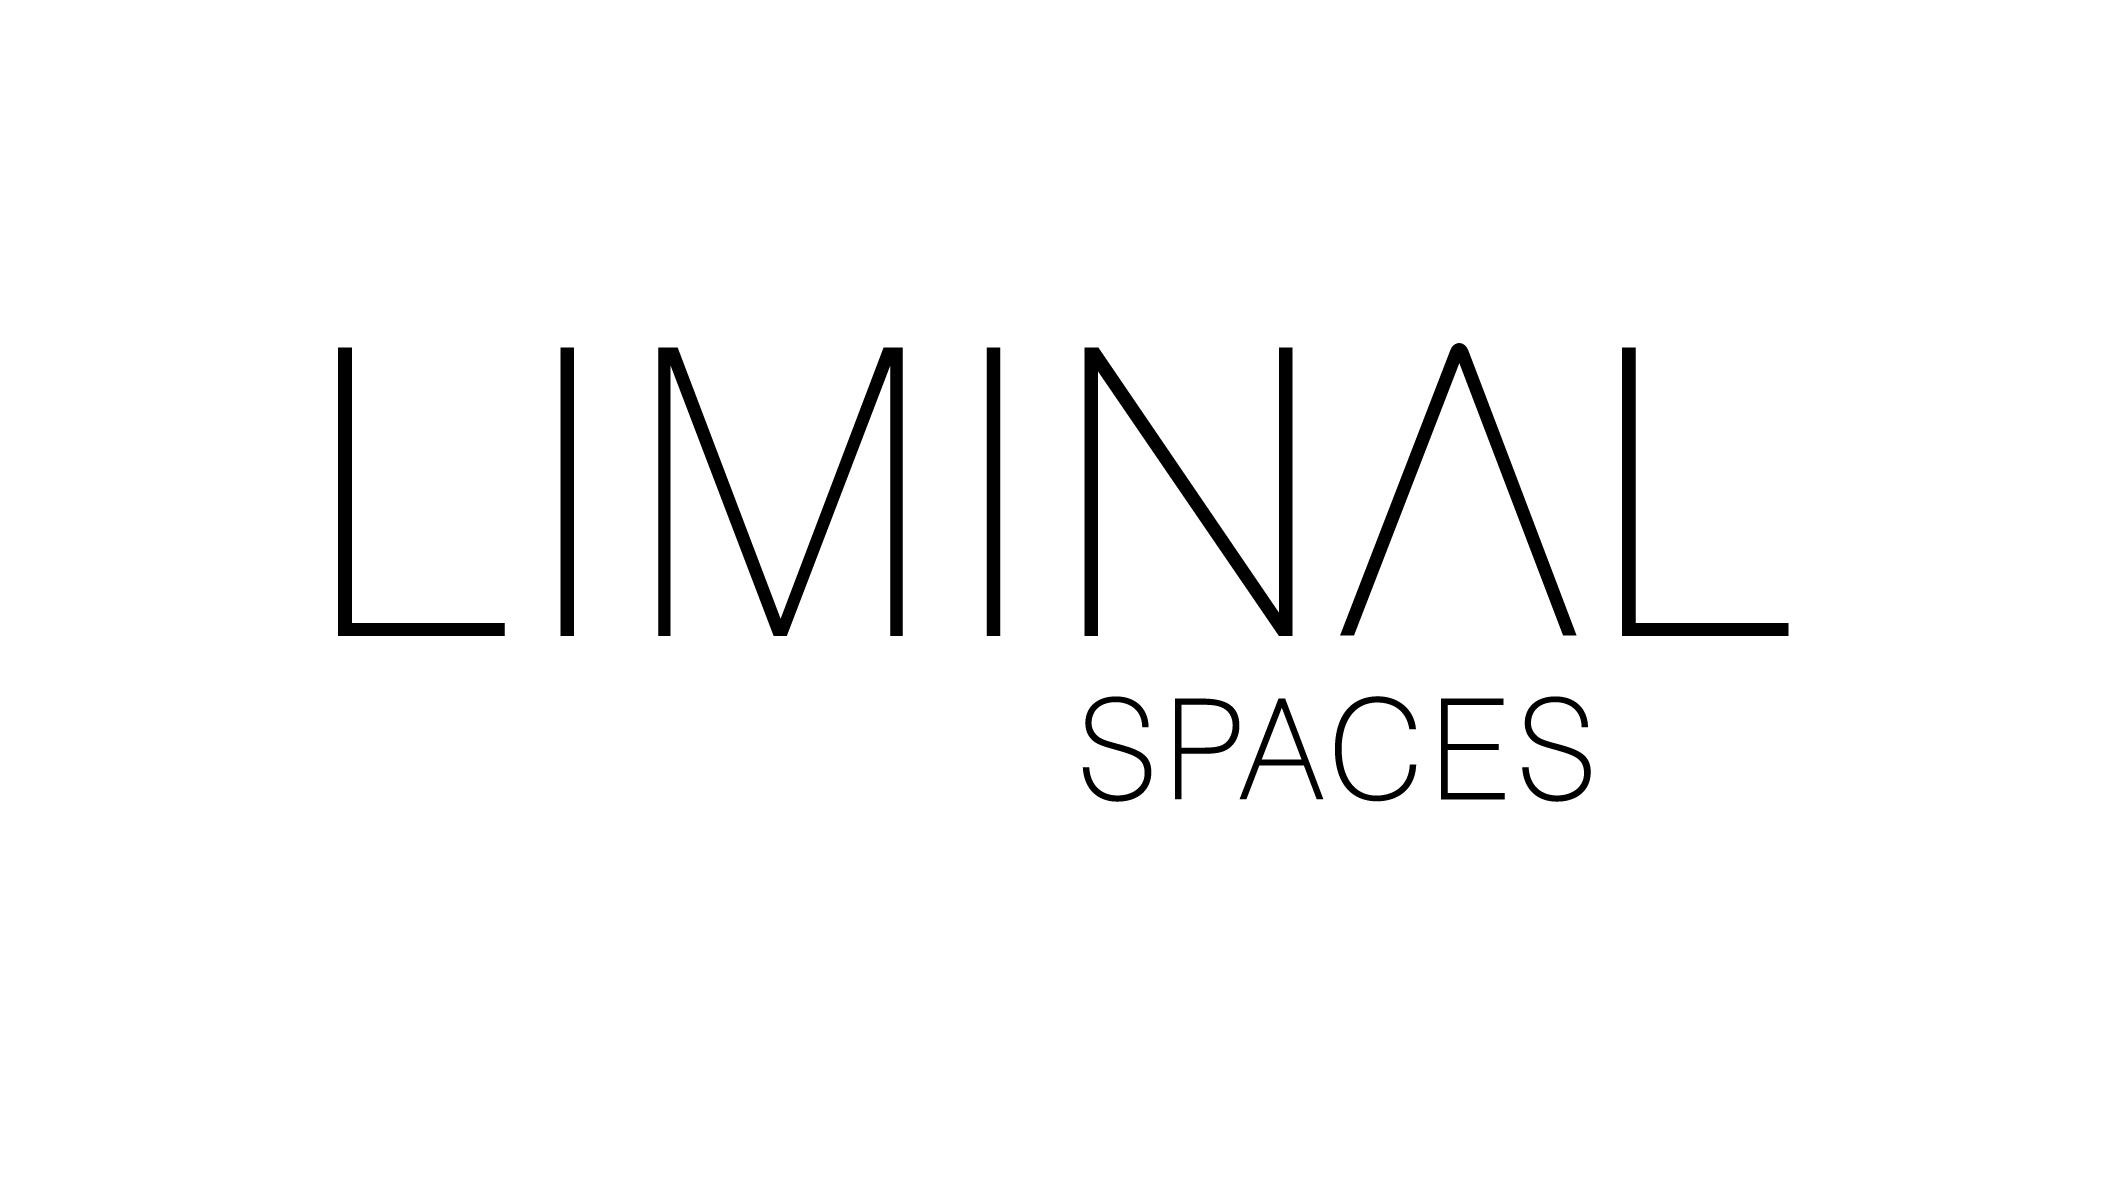 Liminal Spaces' logo in black writing sits on a white background